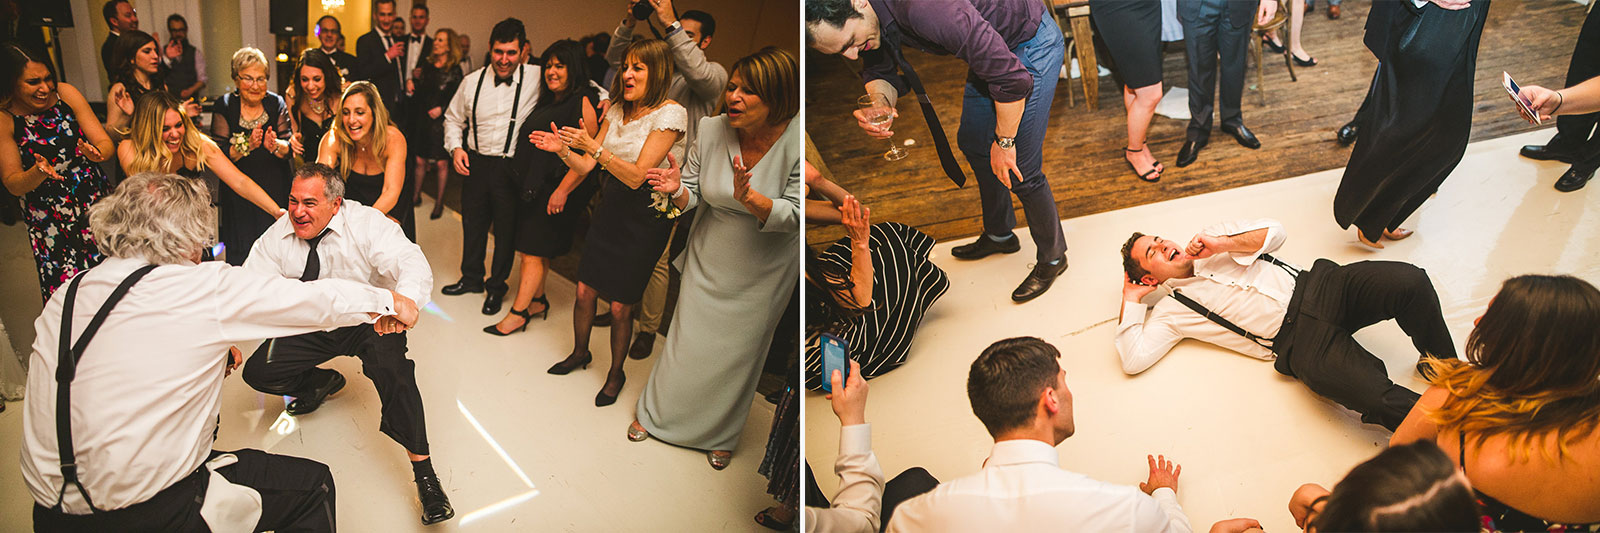 88 reception photography inspiration - Chicago Wedding Photography at Gallery 1028 // Courtnie + David